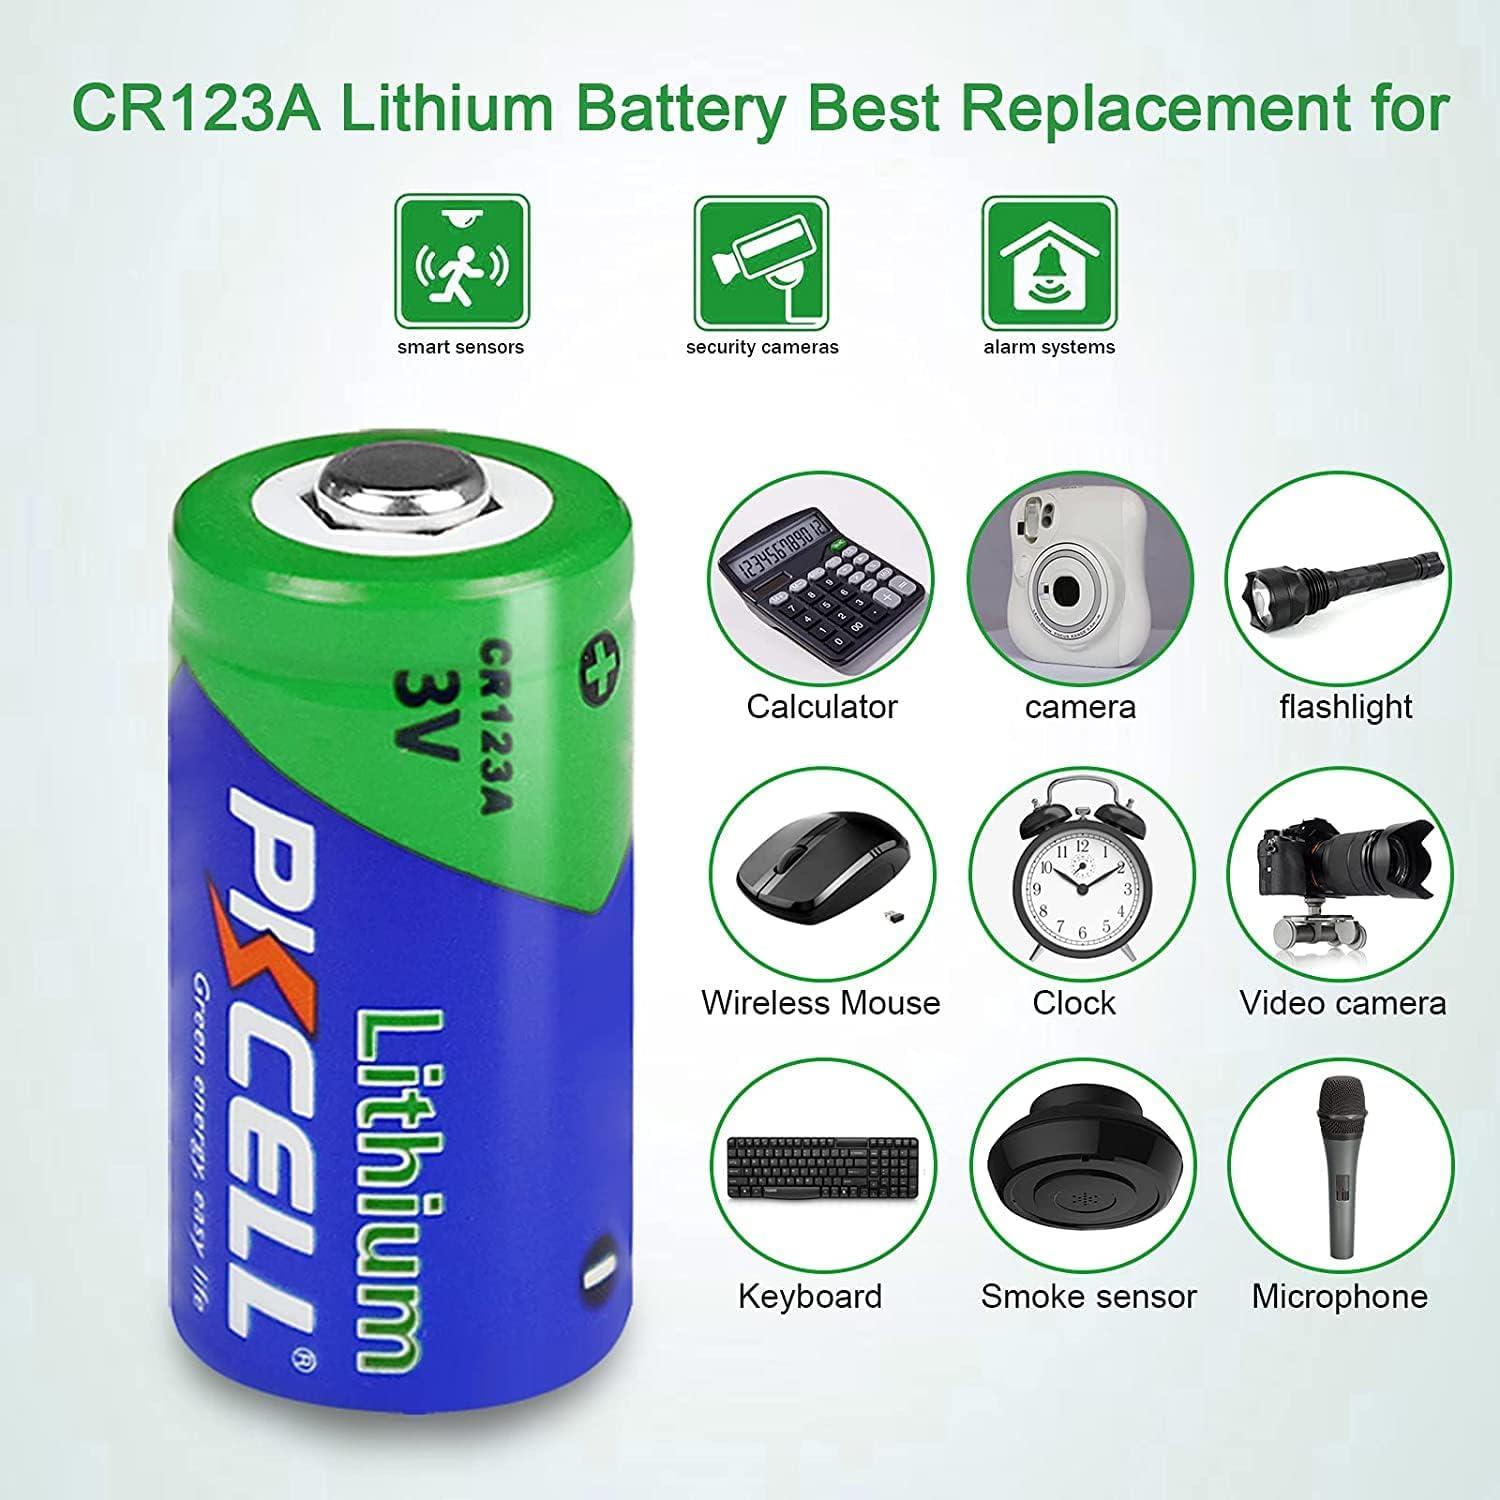 CR123A 3V Lithium Battery 1500mAh 2 Pack, 123 Batteries Lithium, 123A  Lithium Batteries 3 Volt High Power, CR123 for High Intensity Flashlight,  Home Safety, Security Devices 1 Count (Pack of 2)